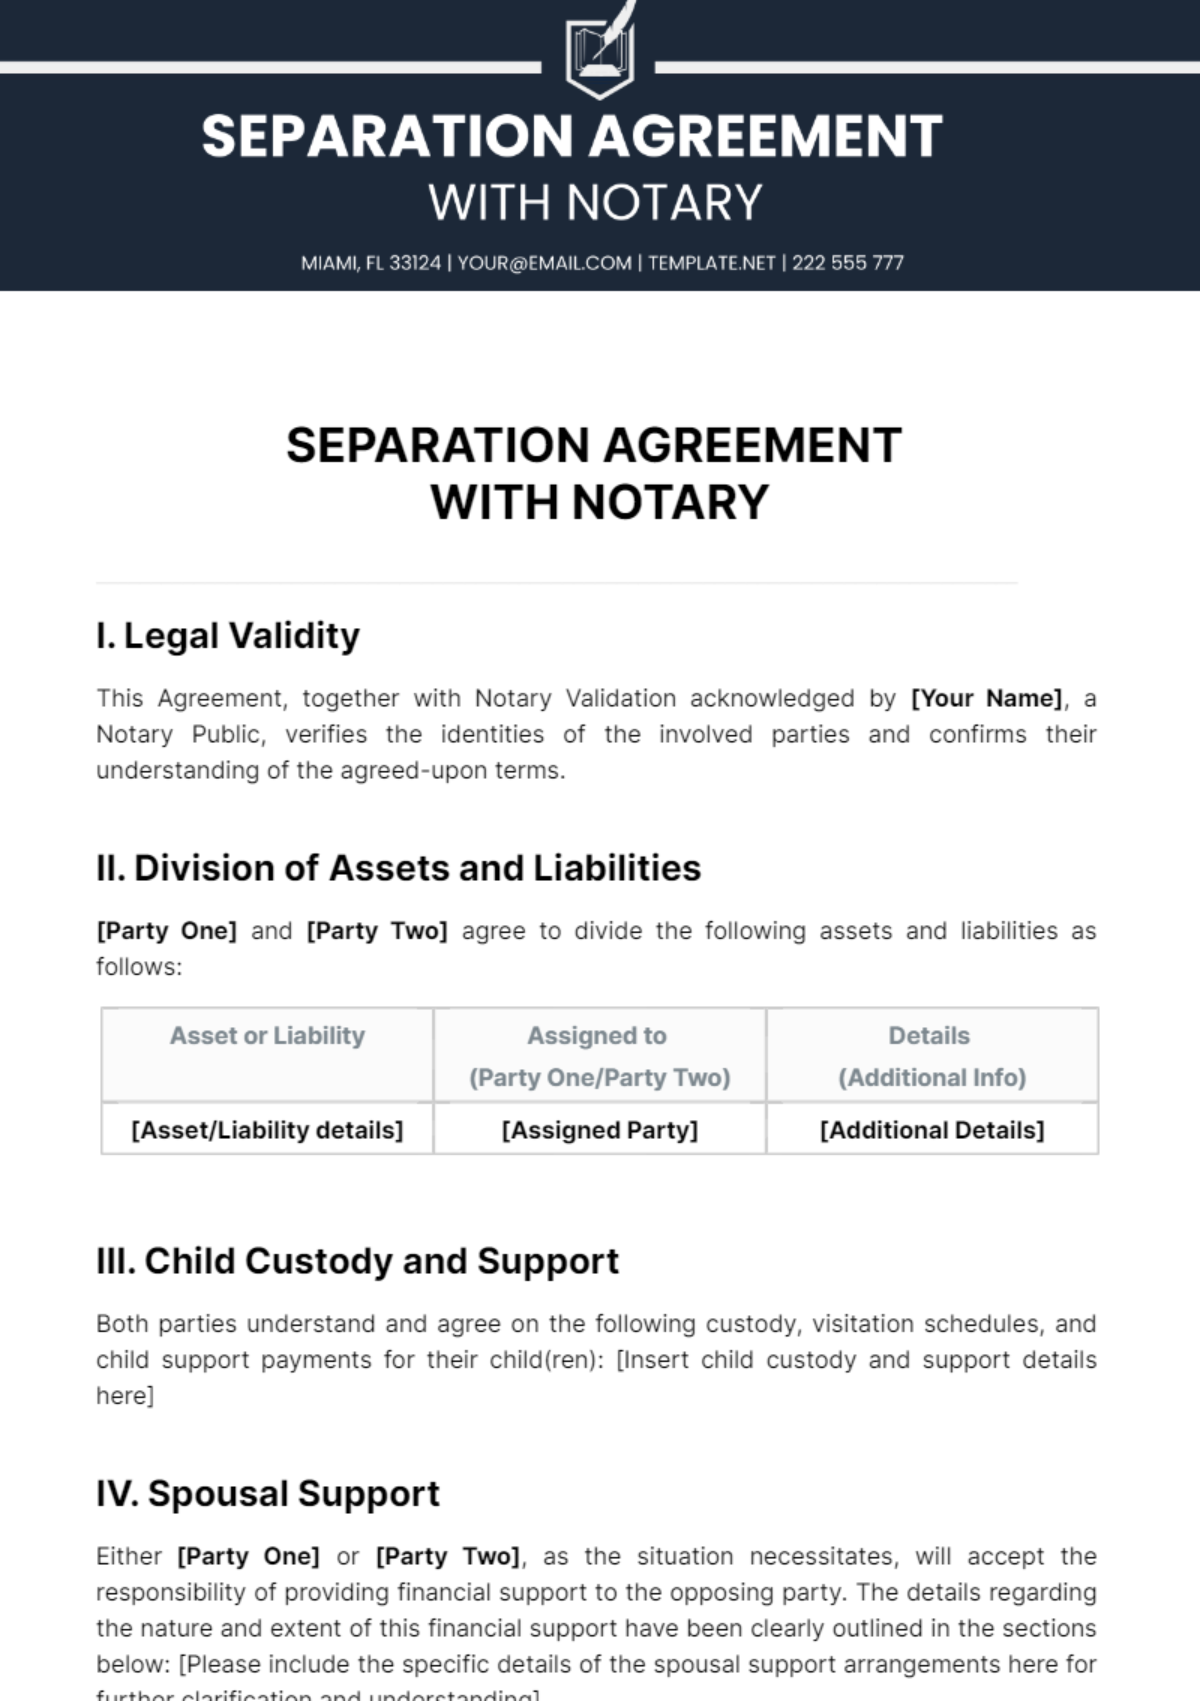 Free Separation Agreement With Notary Template